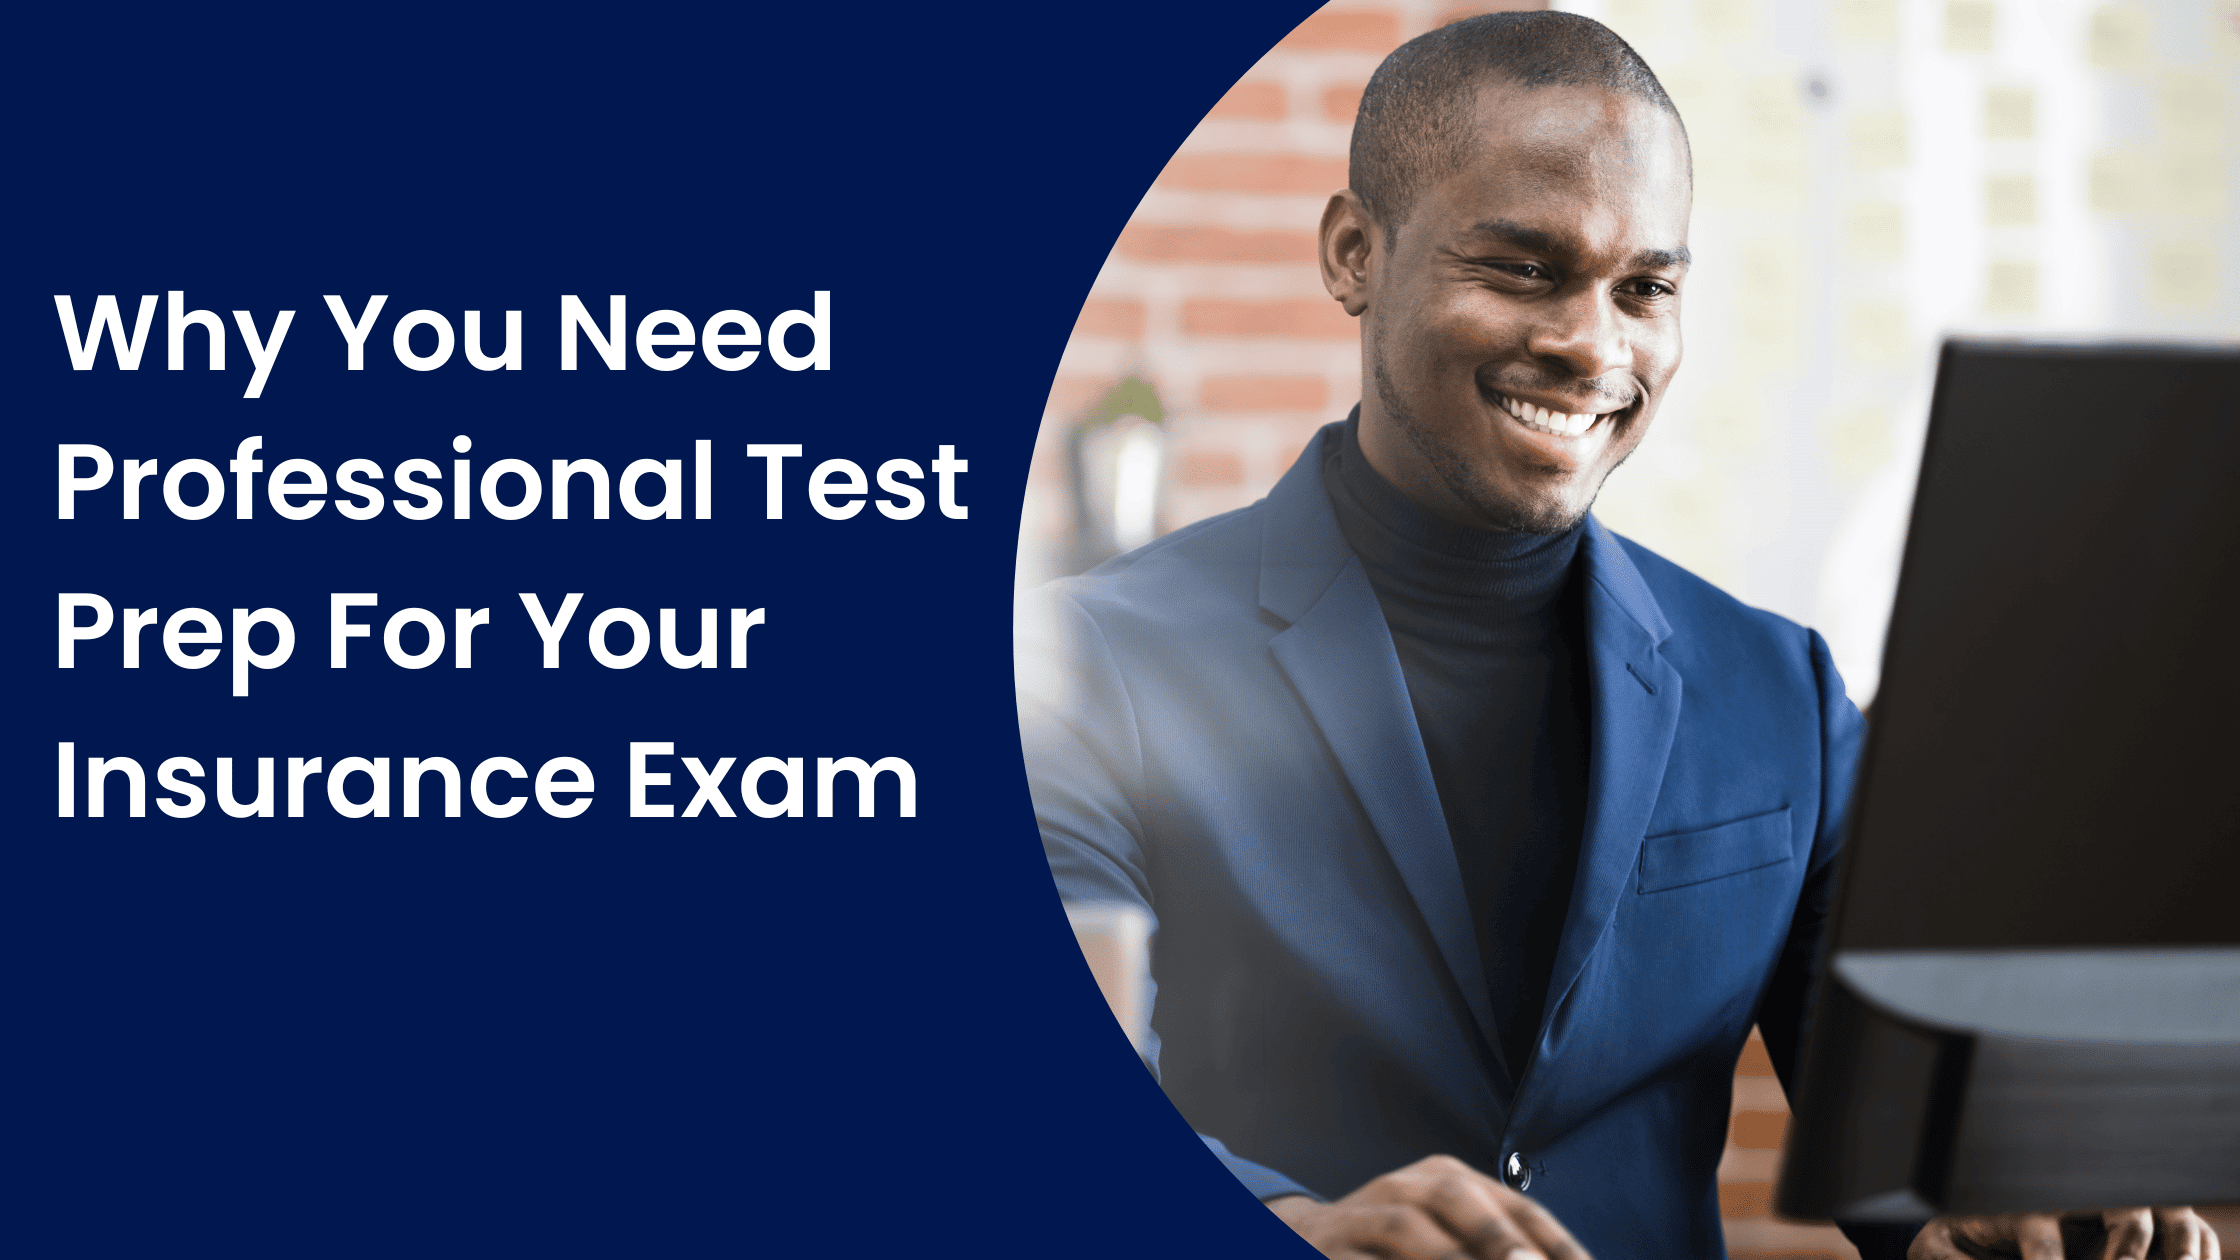 Why You Need Professional Test Prep For Your Insurance Exam